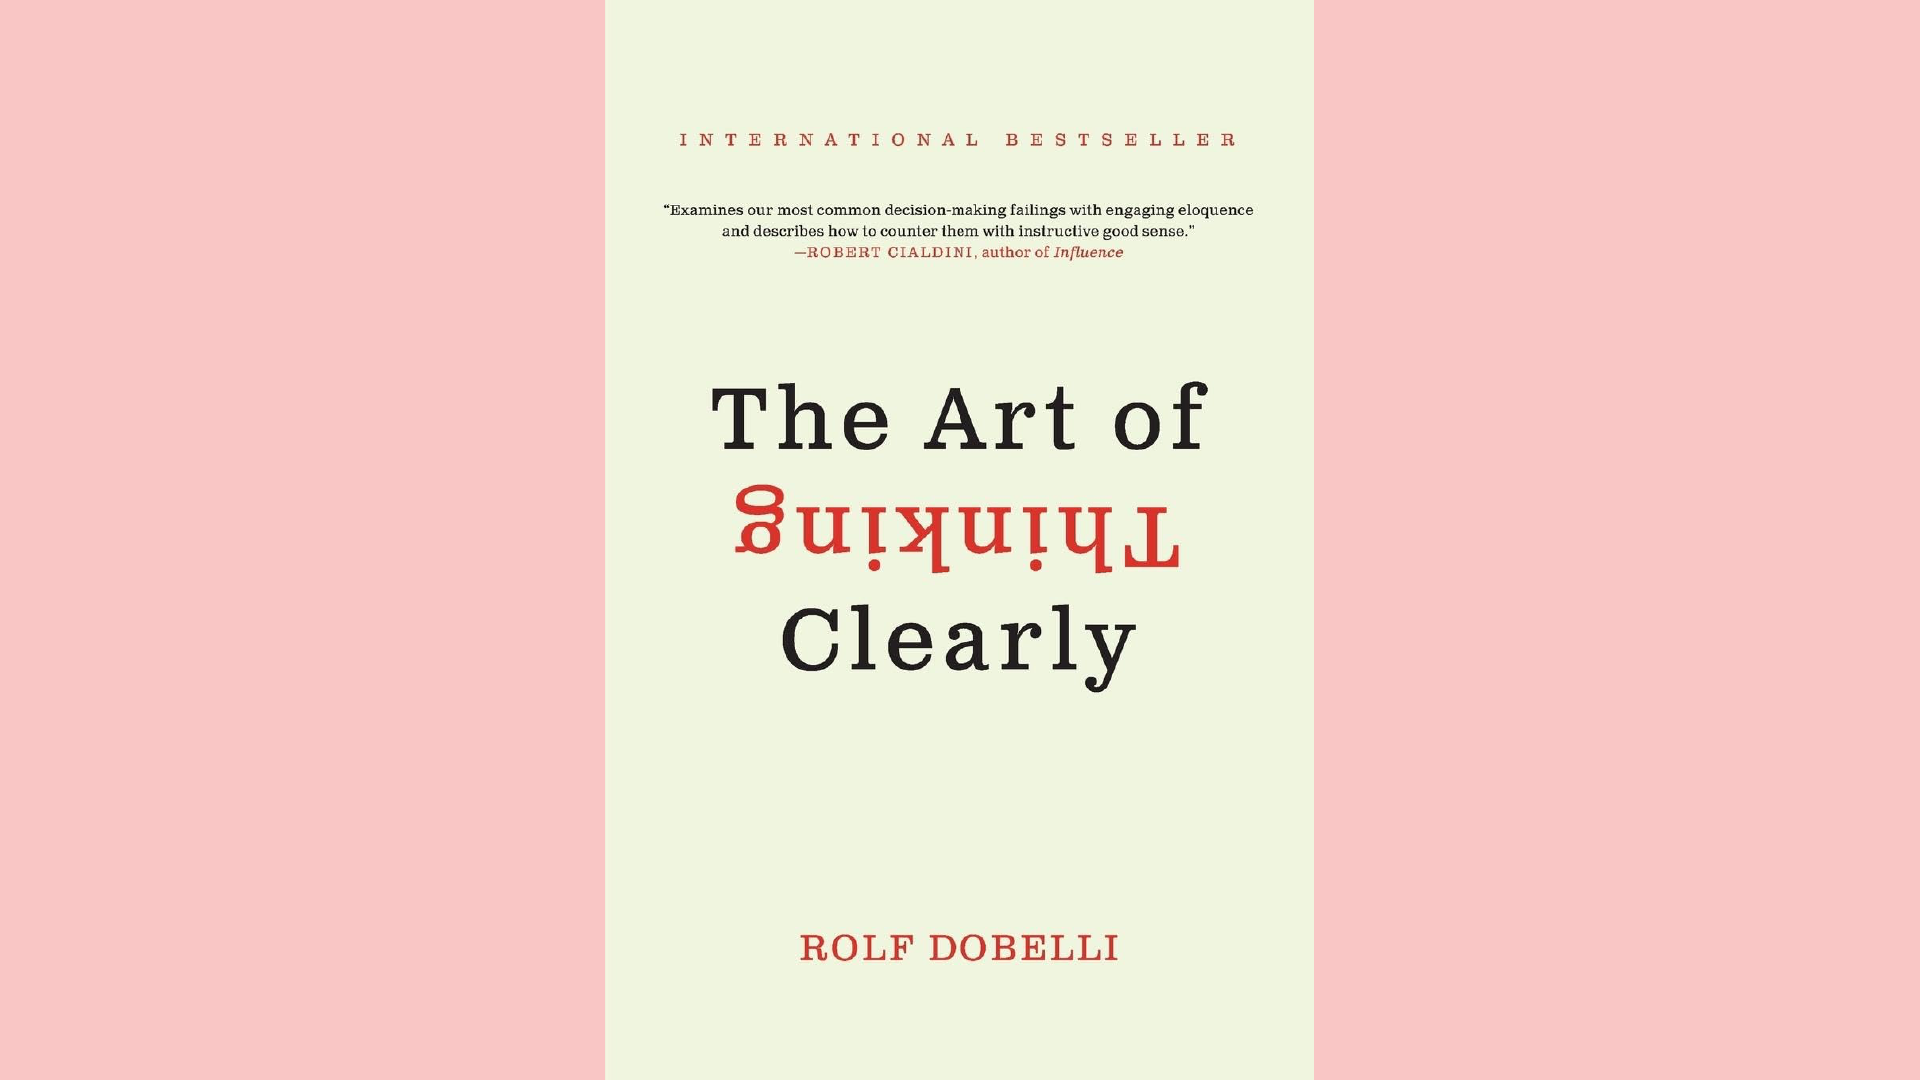 Summary: The Art of Thinking Clearly by Rolf Dobelli